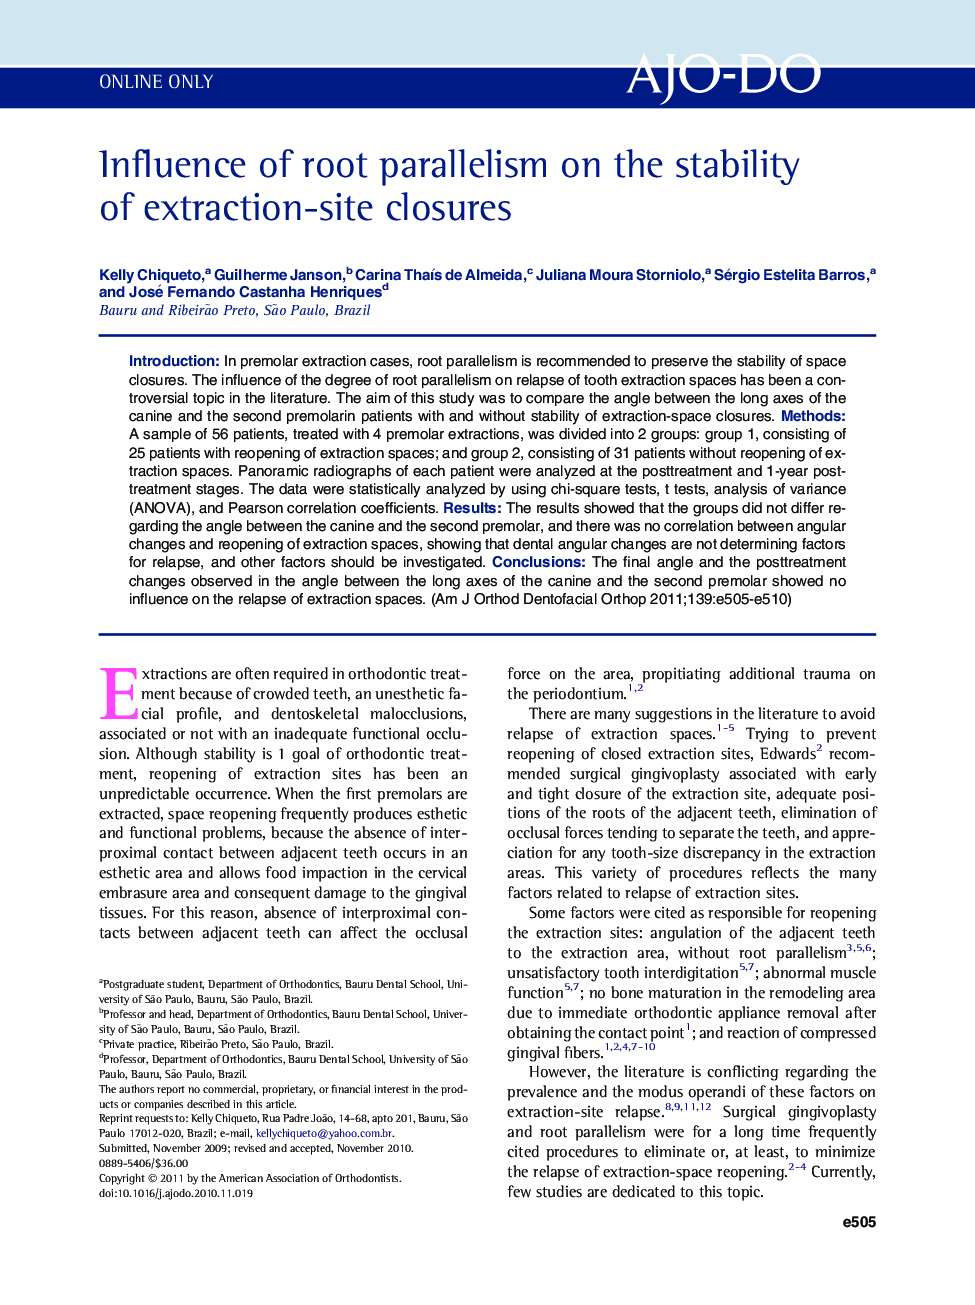 Influence of root parallelism on the stability of extraction-site closures 